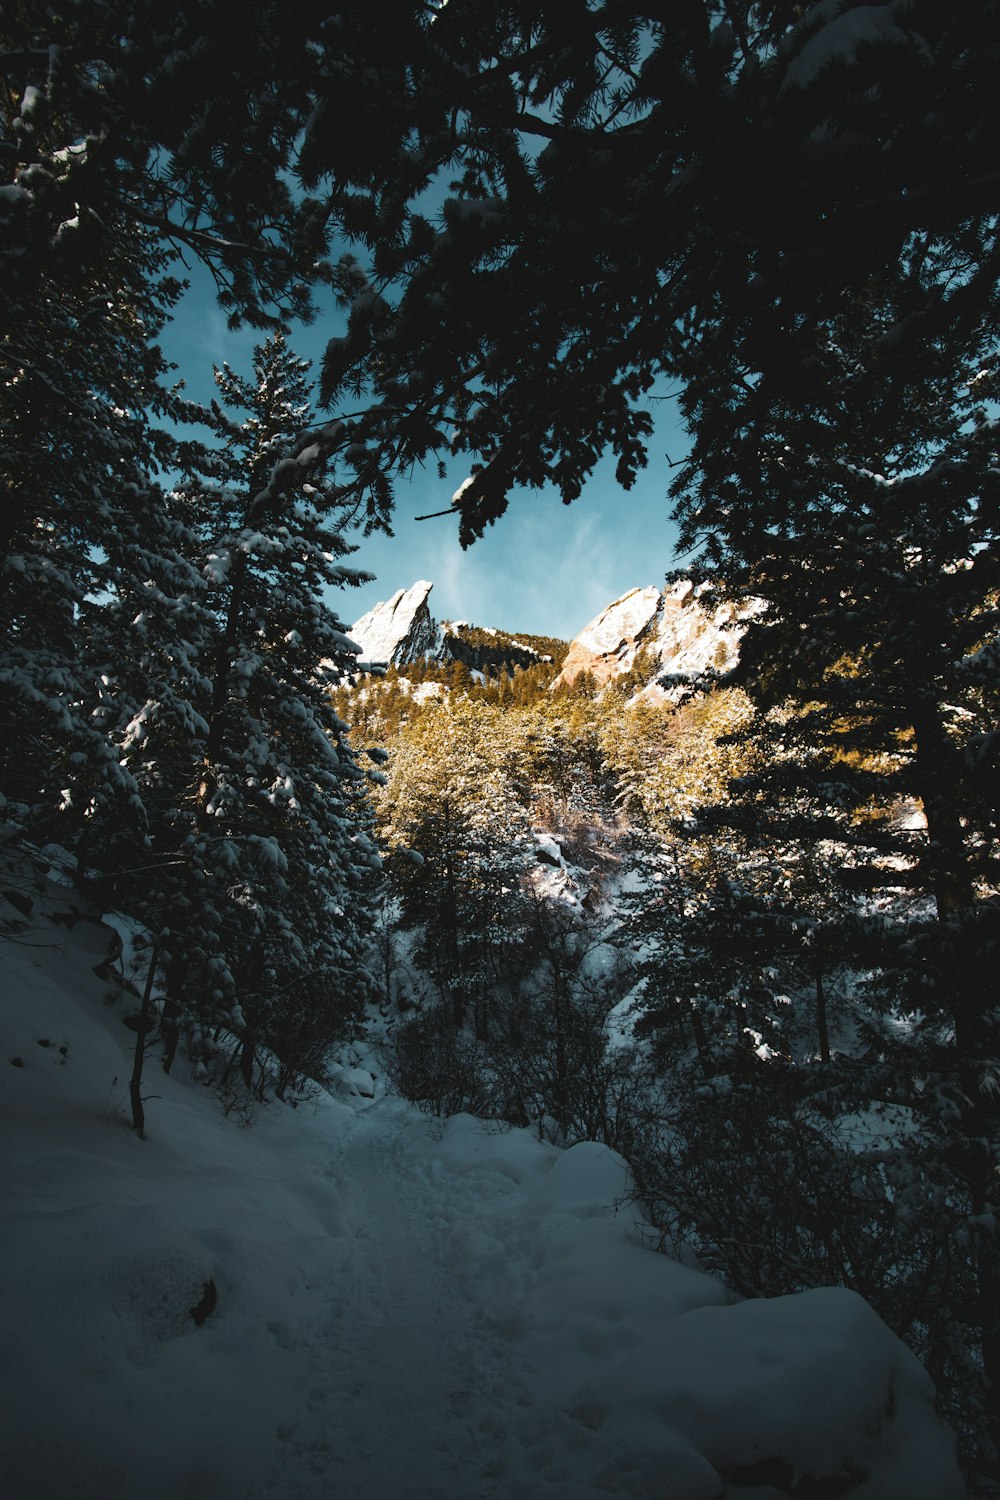 a snow covered forest with a mountain in the background